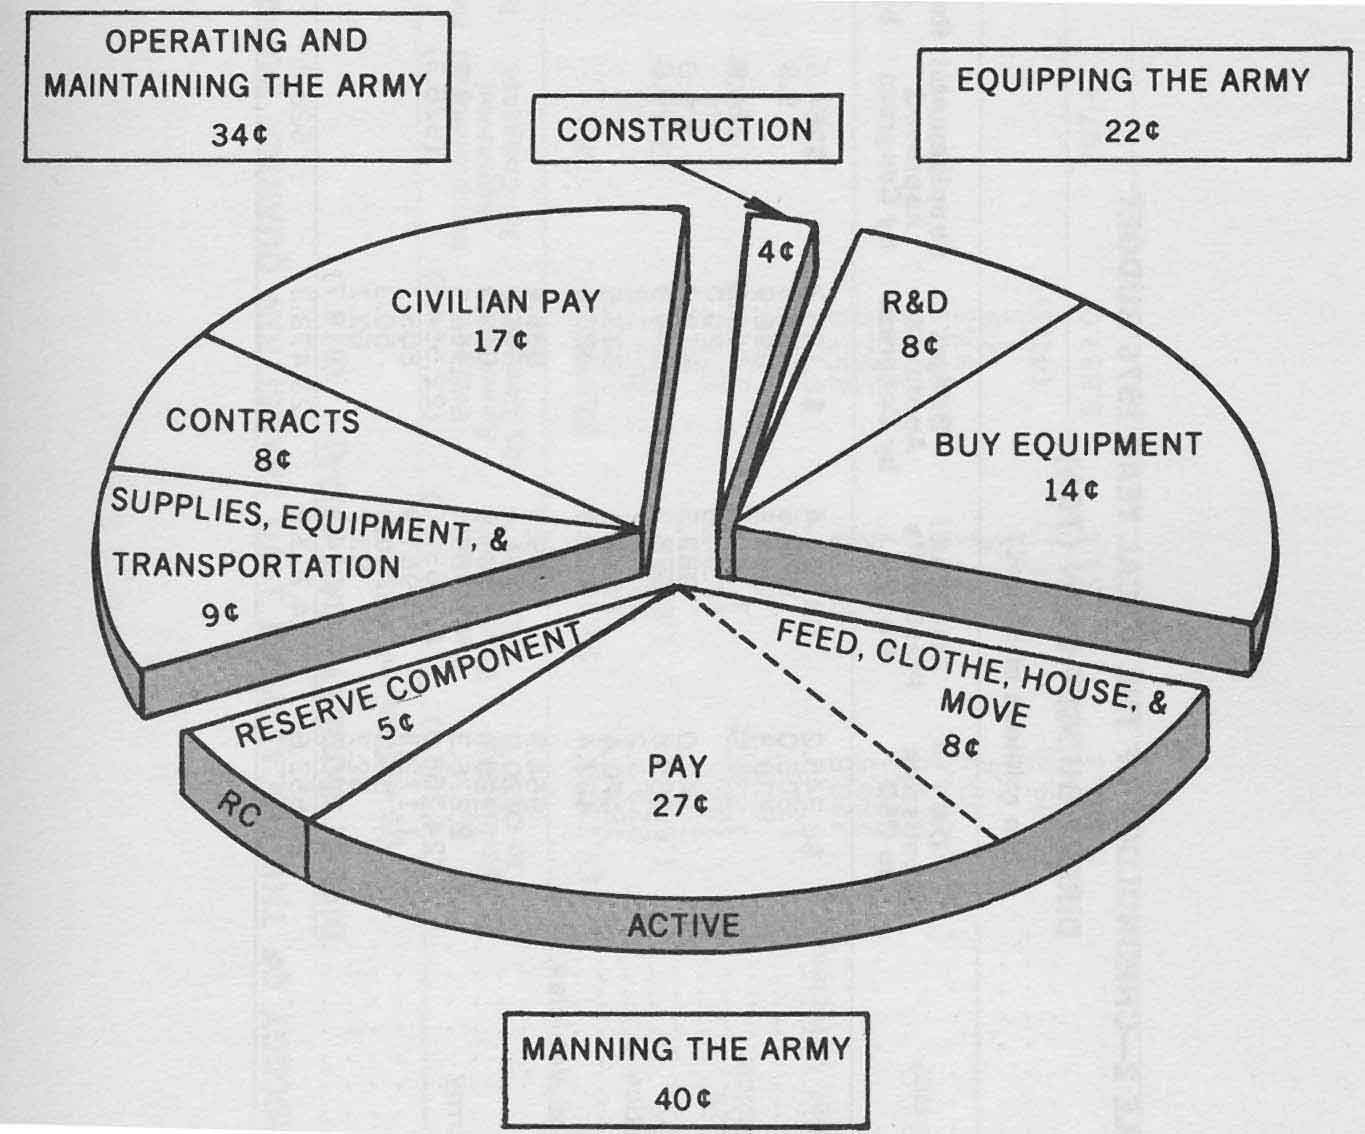 CHART 1 - HOW THE ARMY DOLLAR WAS SPENT